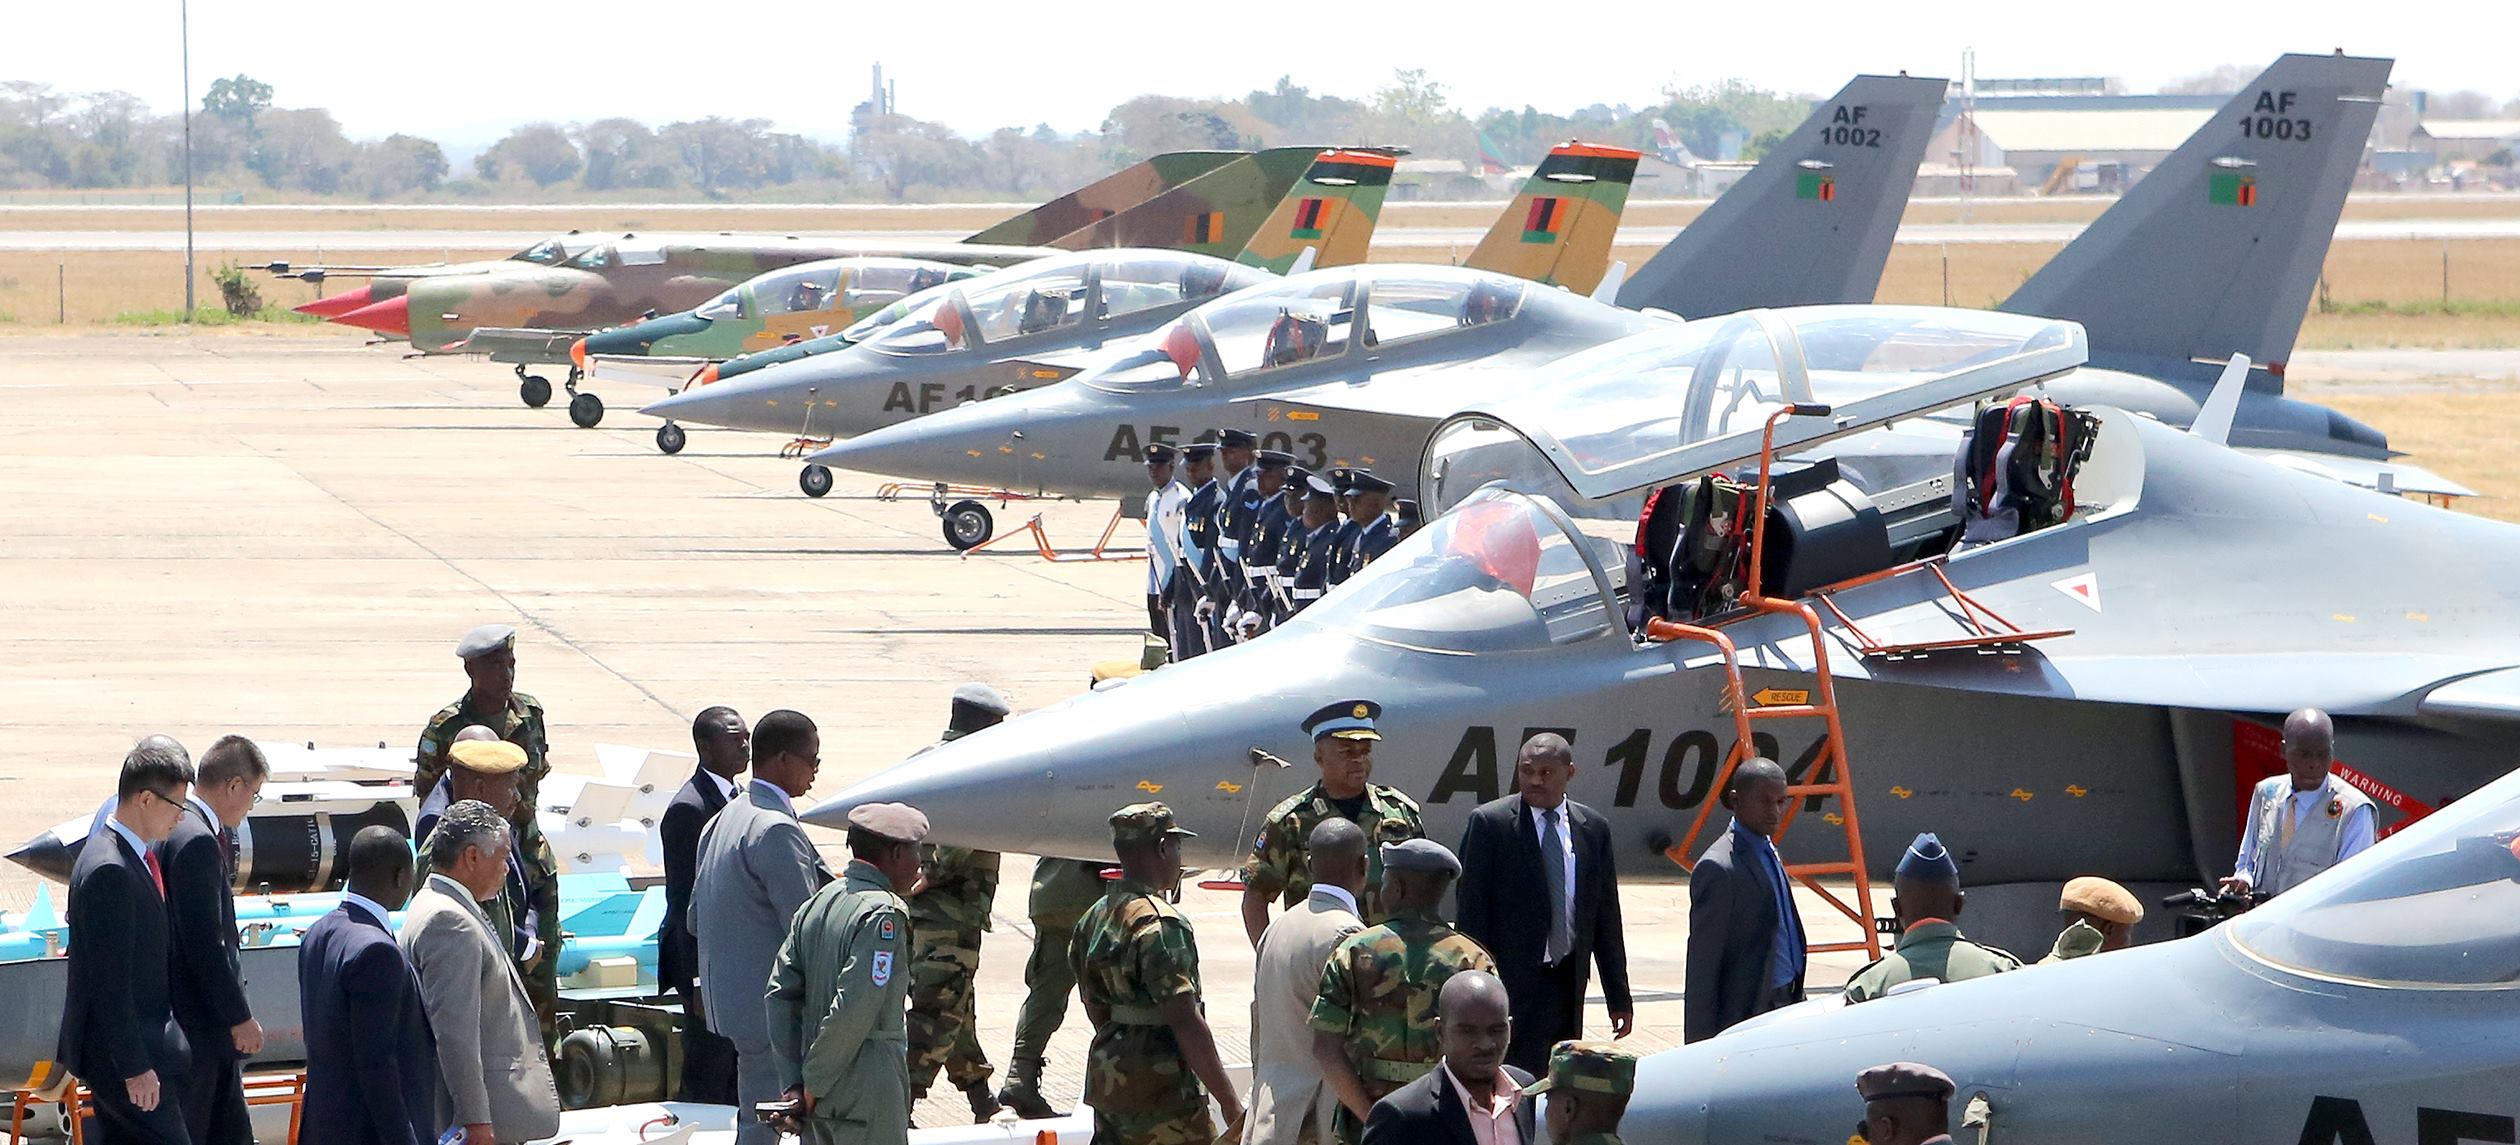 Induction ceremony of Zambia’s new L-15 aircraft by His Excellence Mr. Edgar Lungu.